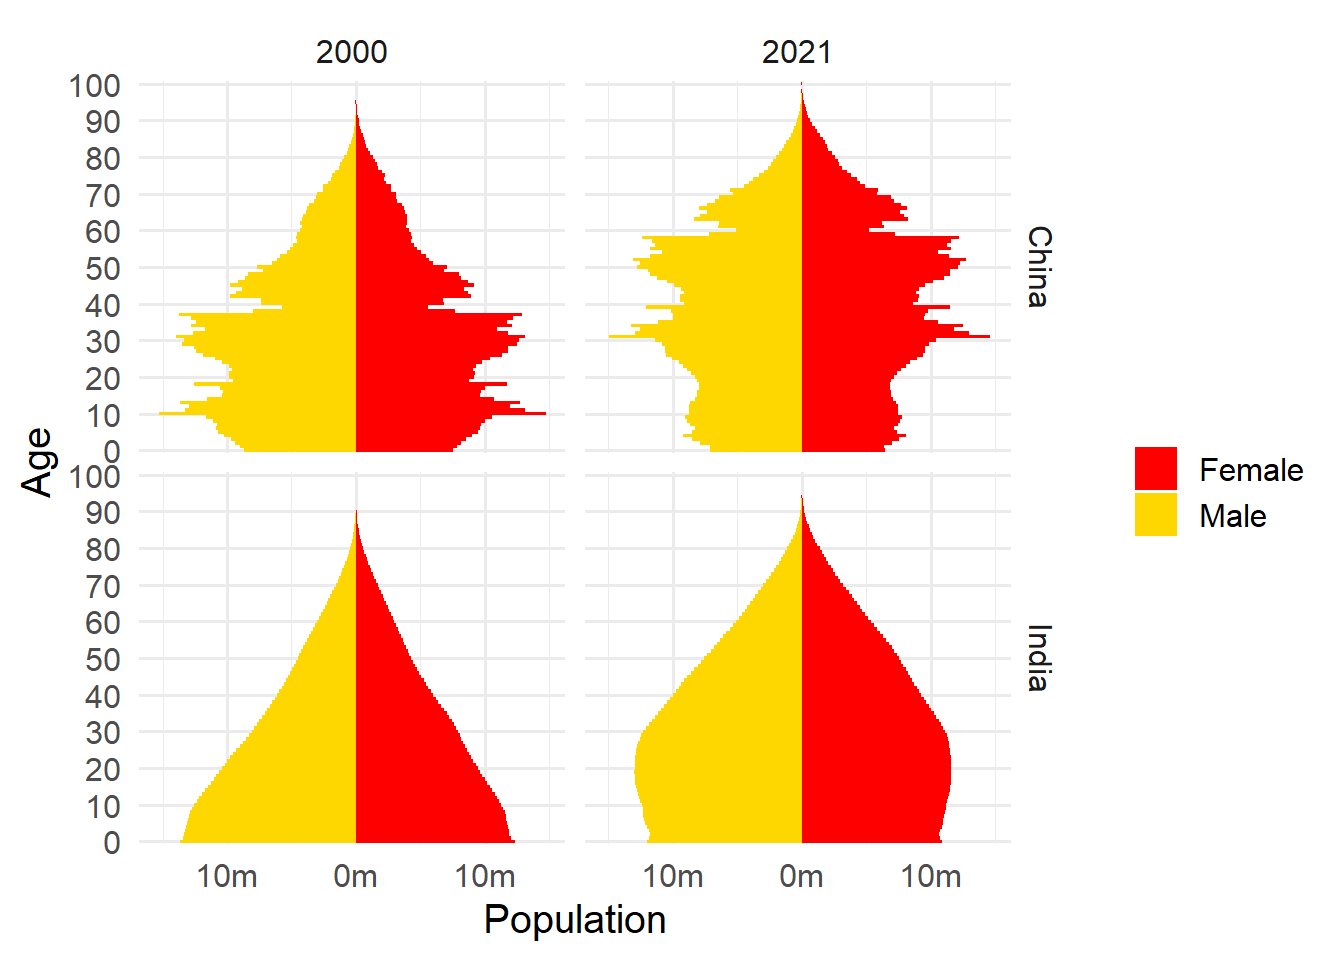 Population structure of
China and Japan, 2000 and 2021